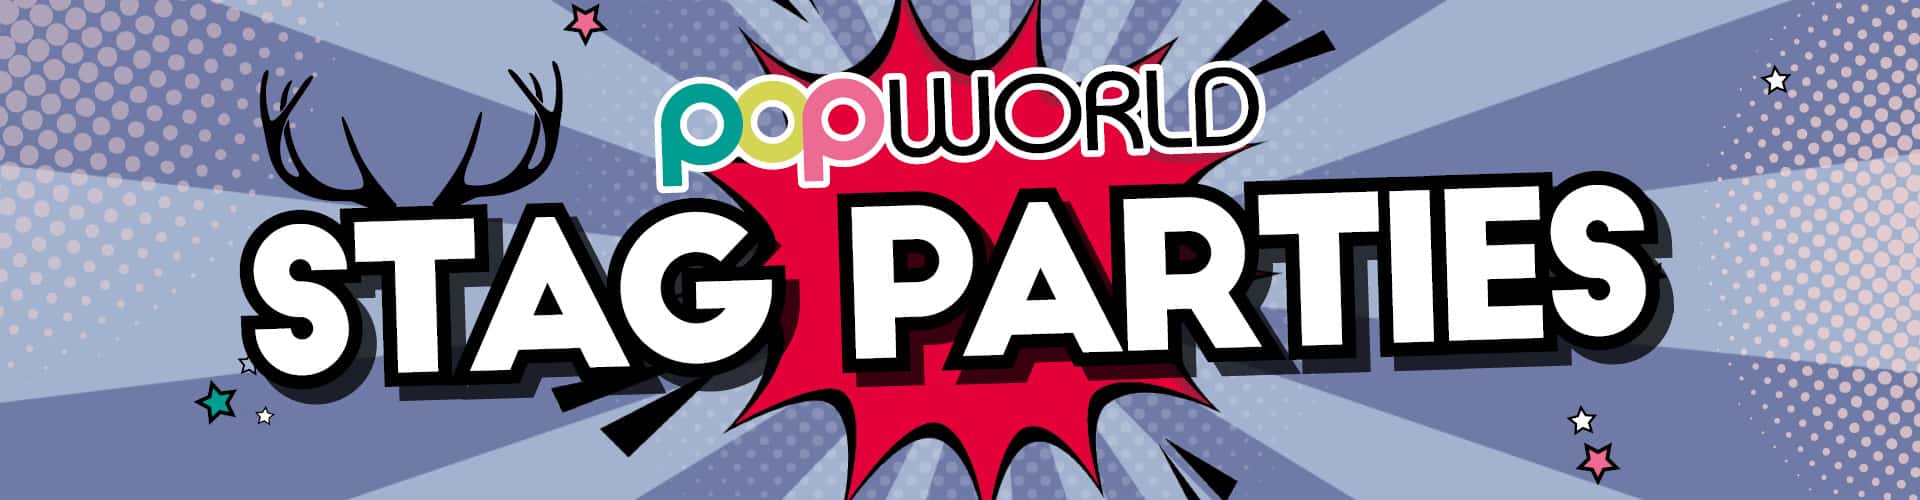 Stag Parties at Popworld Manchester